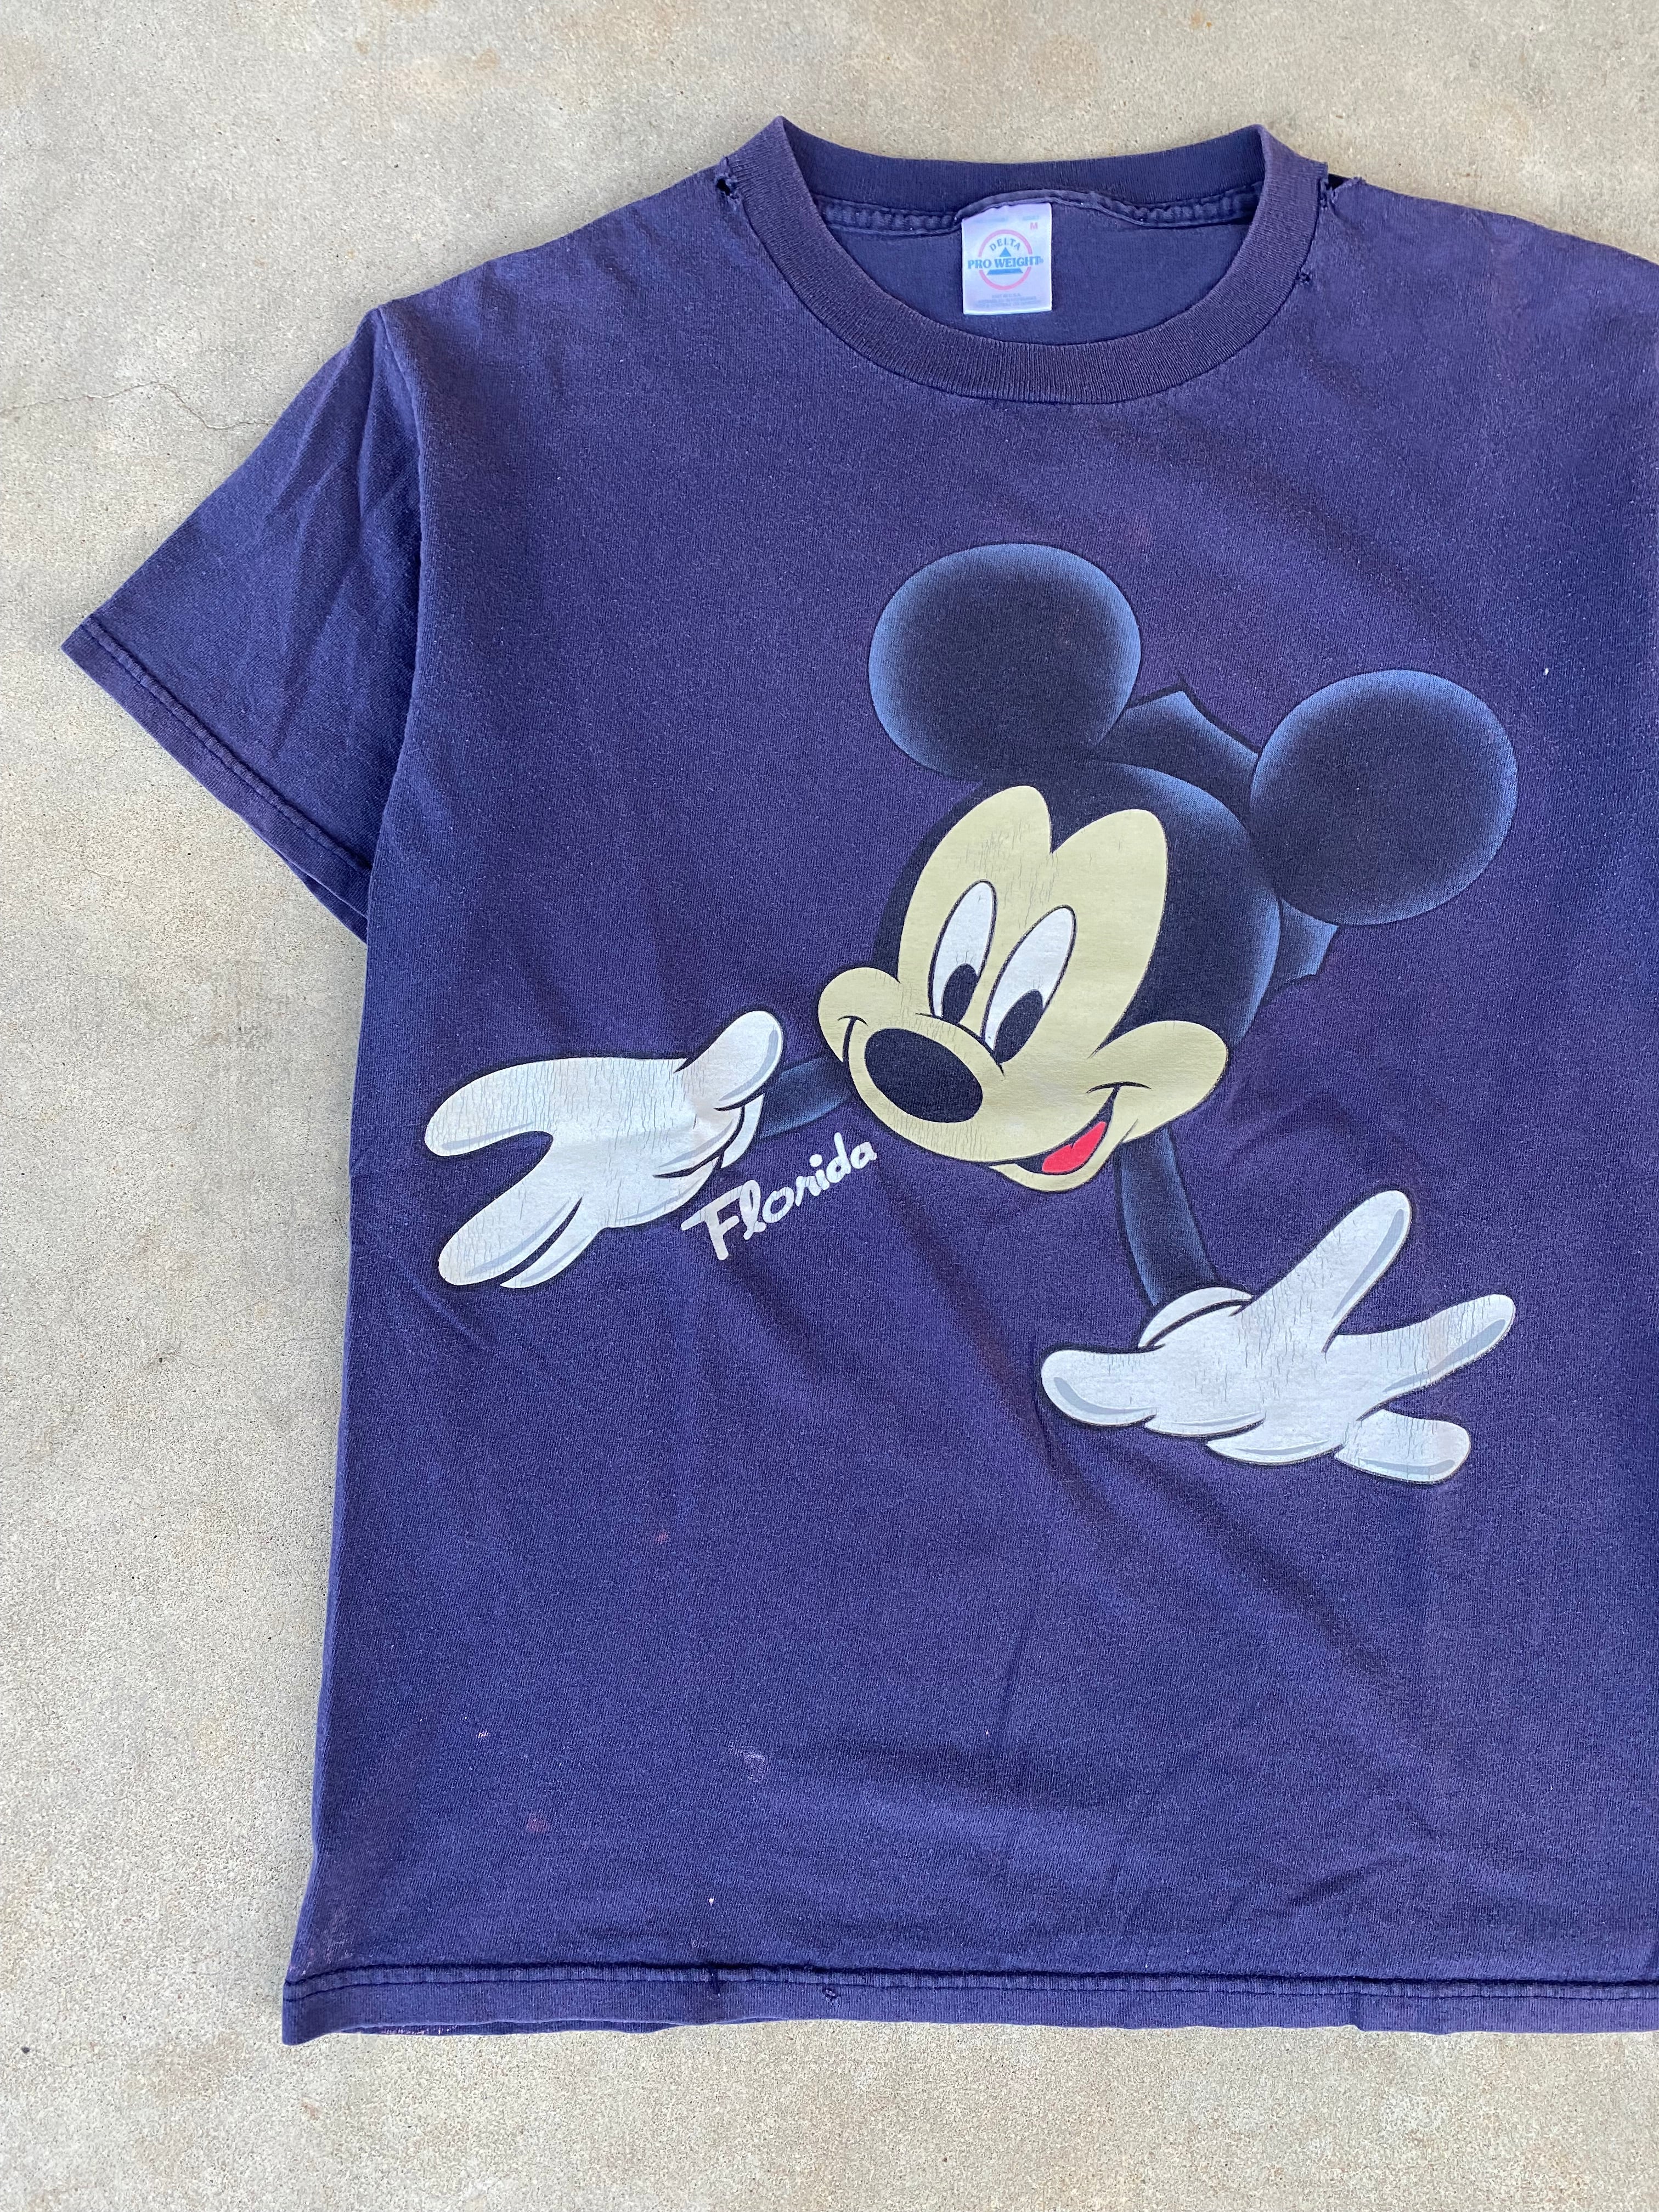 1990s Mickey Florida Distressed/Faded T-Shirt (M)